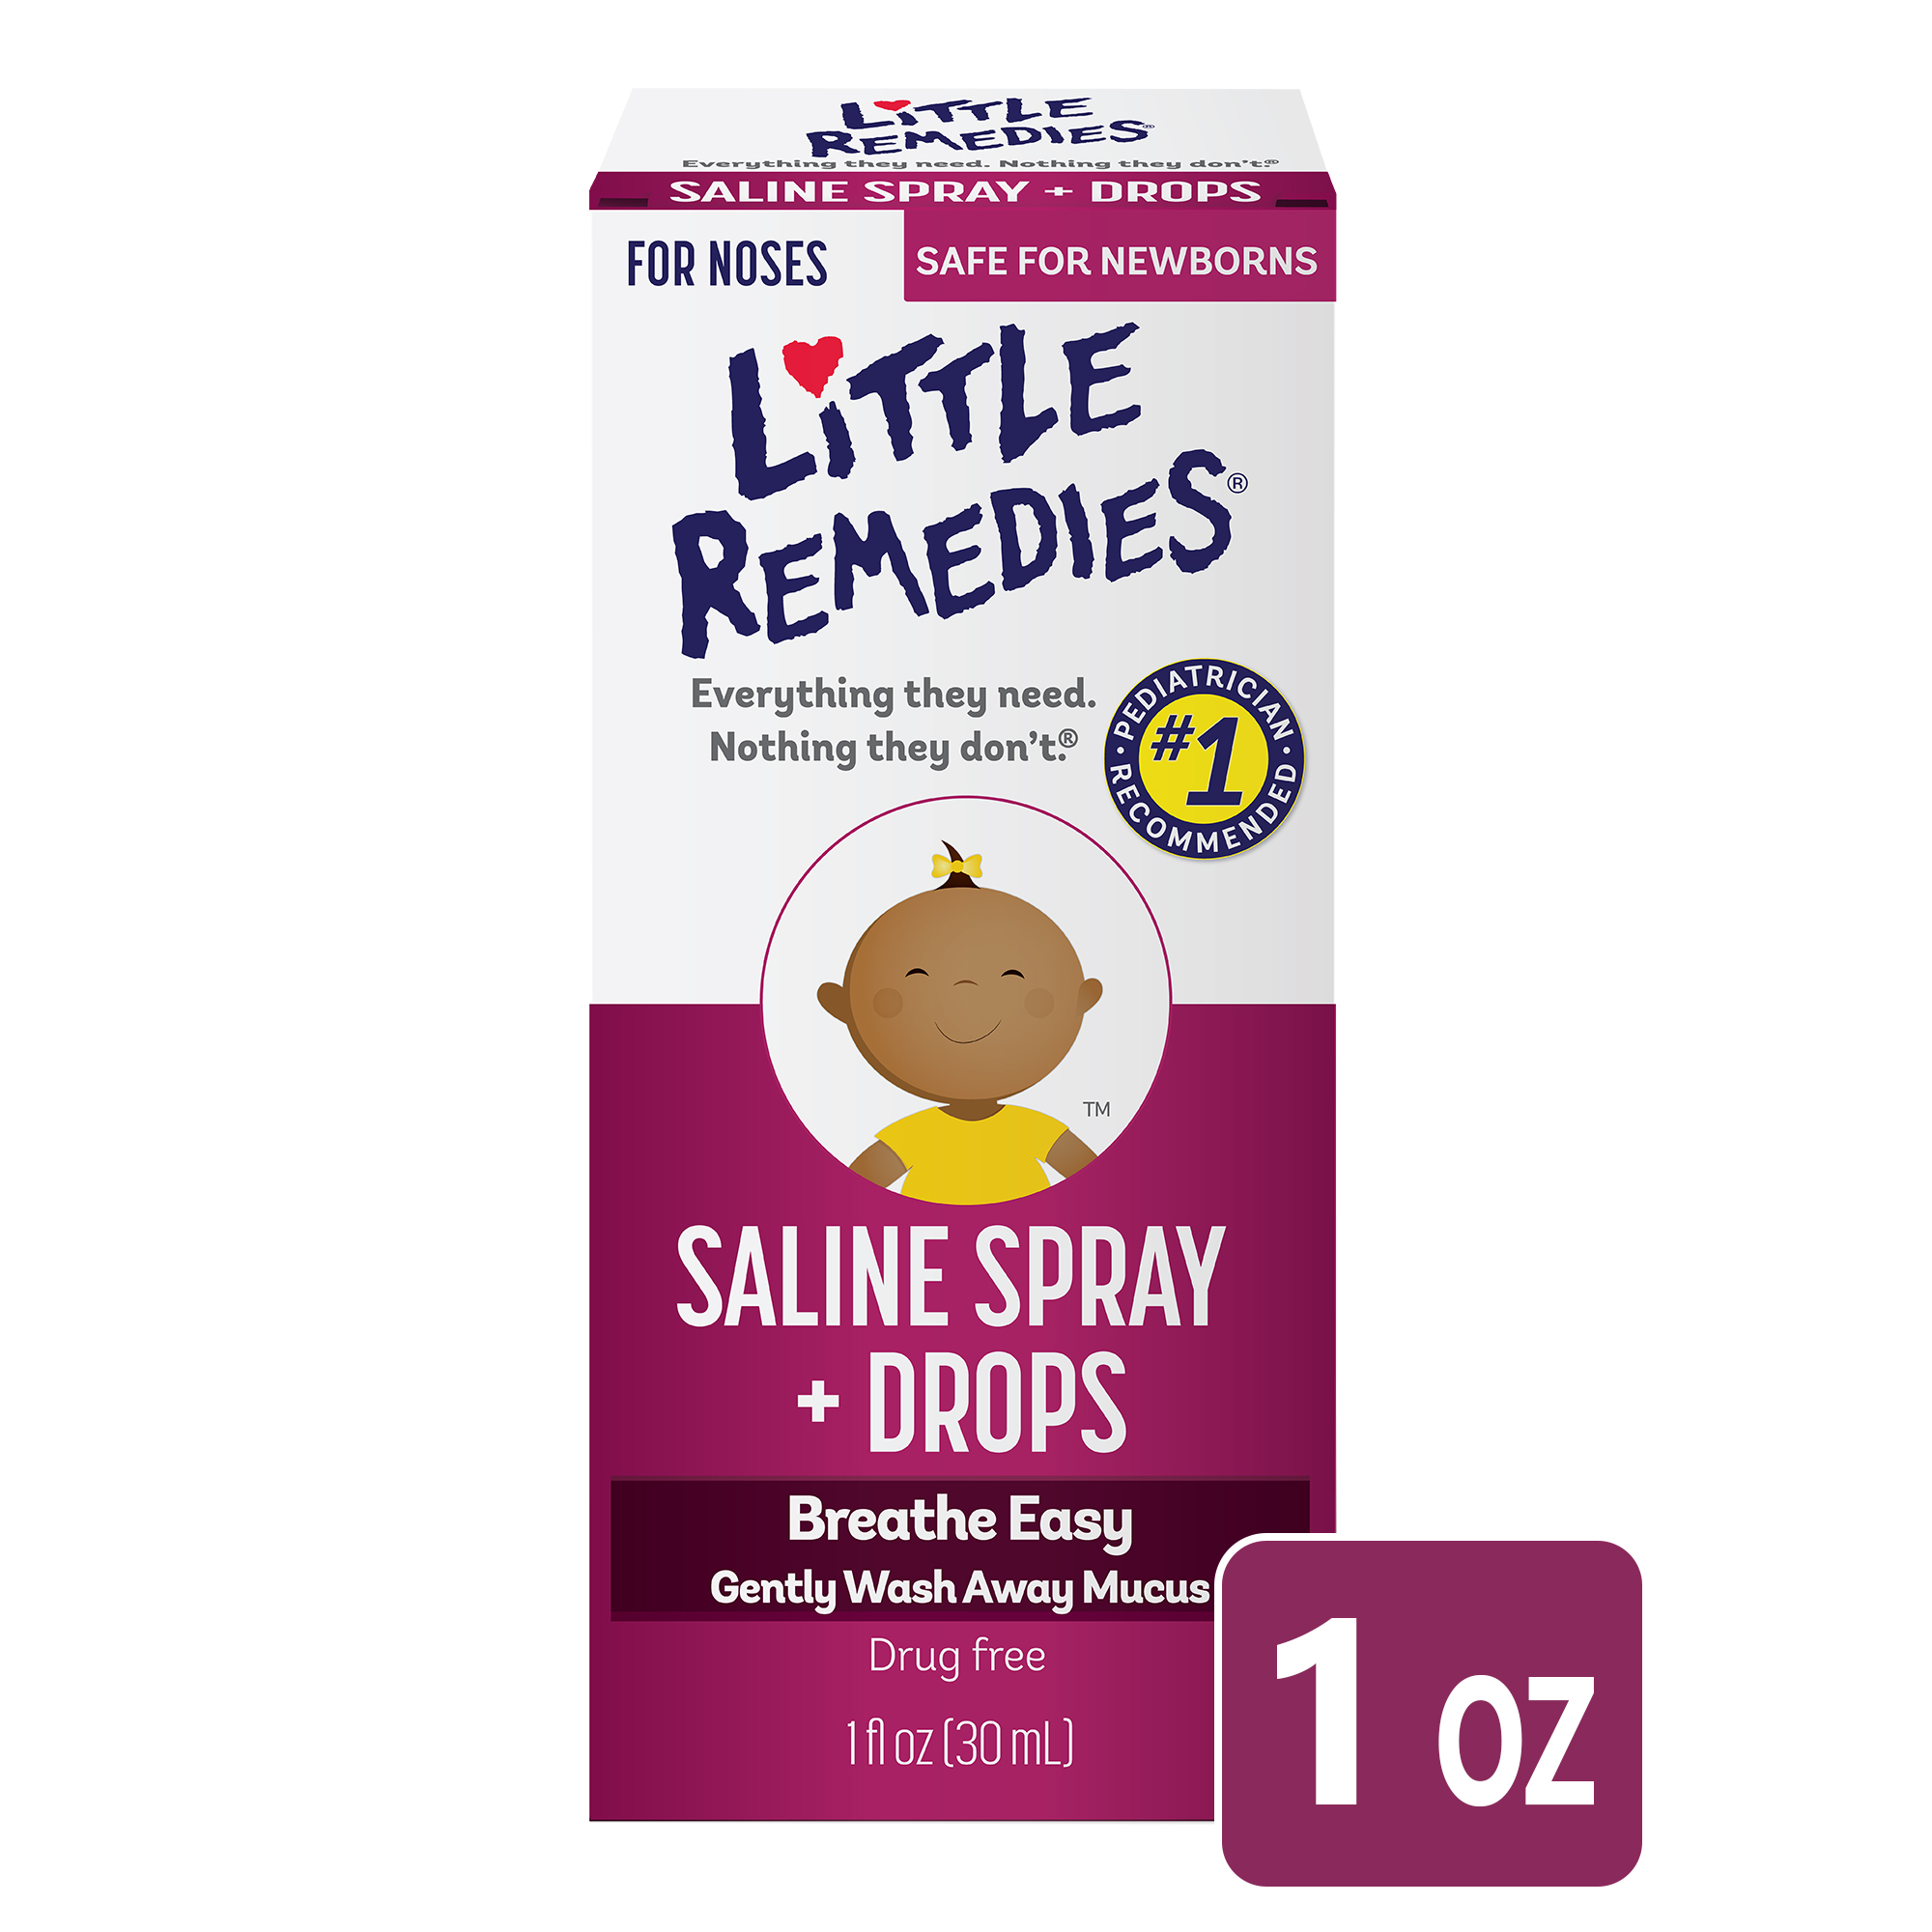 Little Remedies Saline Spray and Drops, Safe for Newborns, Gently Wash Away Mucus, 1 fl oz - image 1 of 9